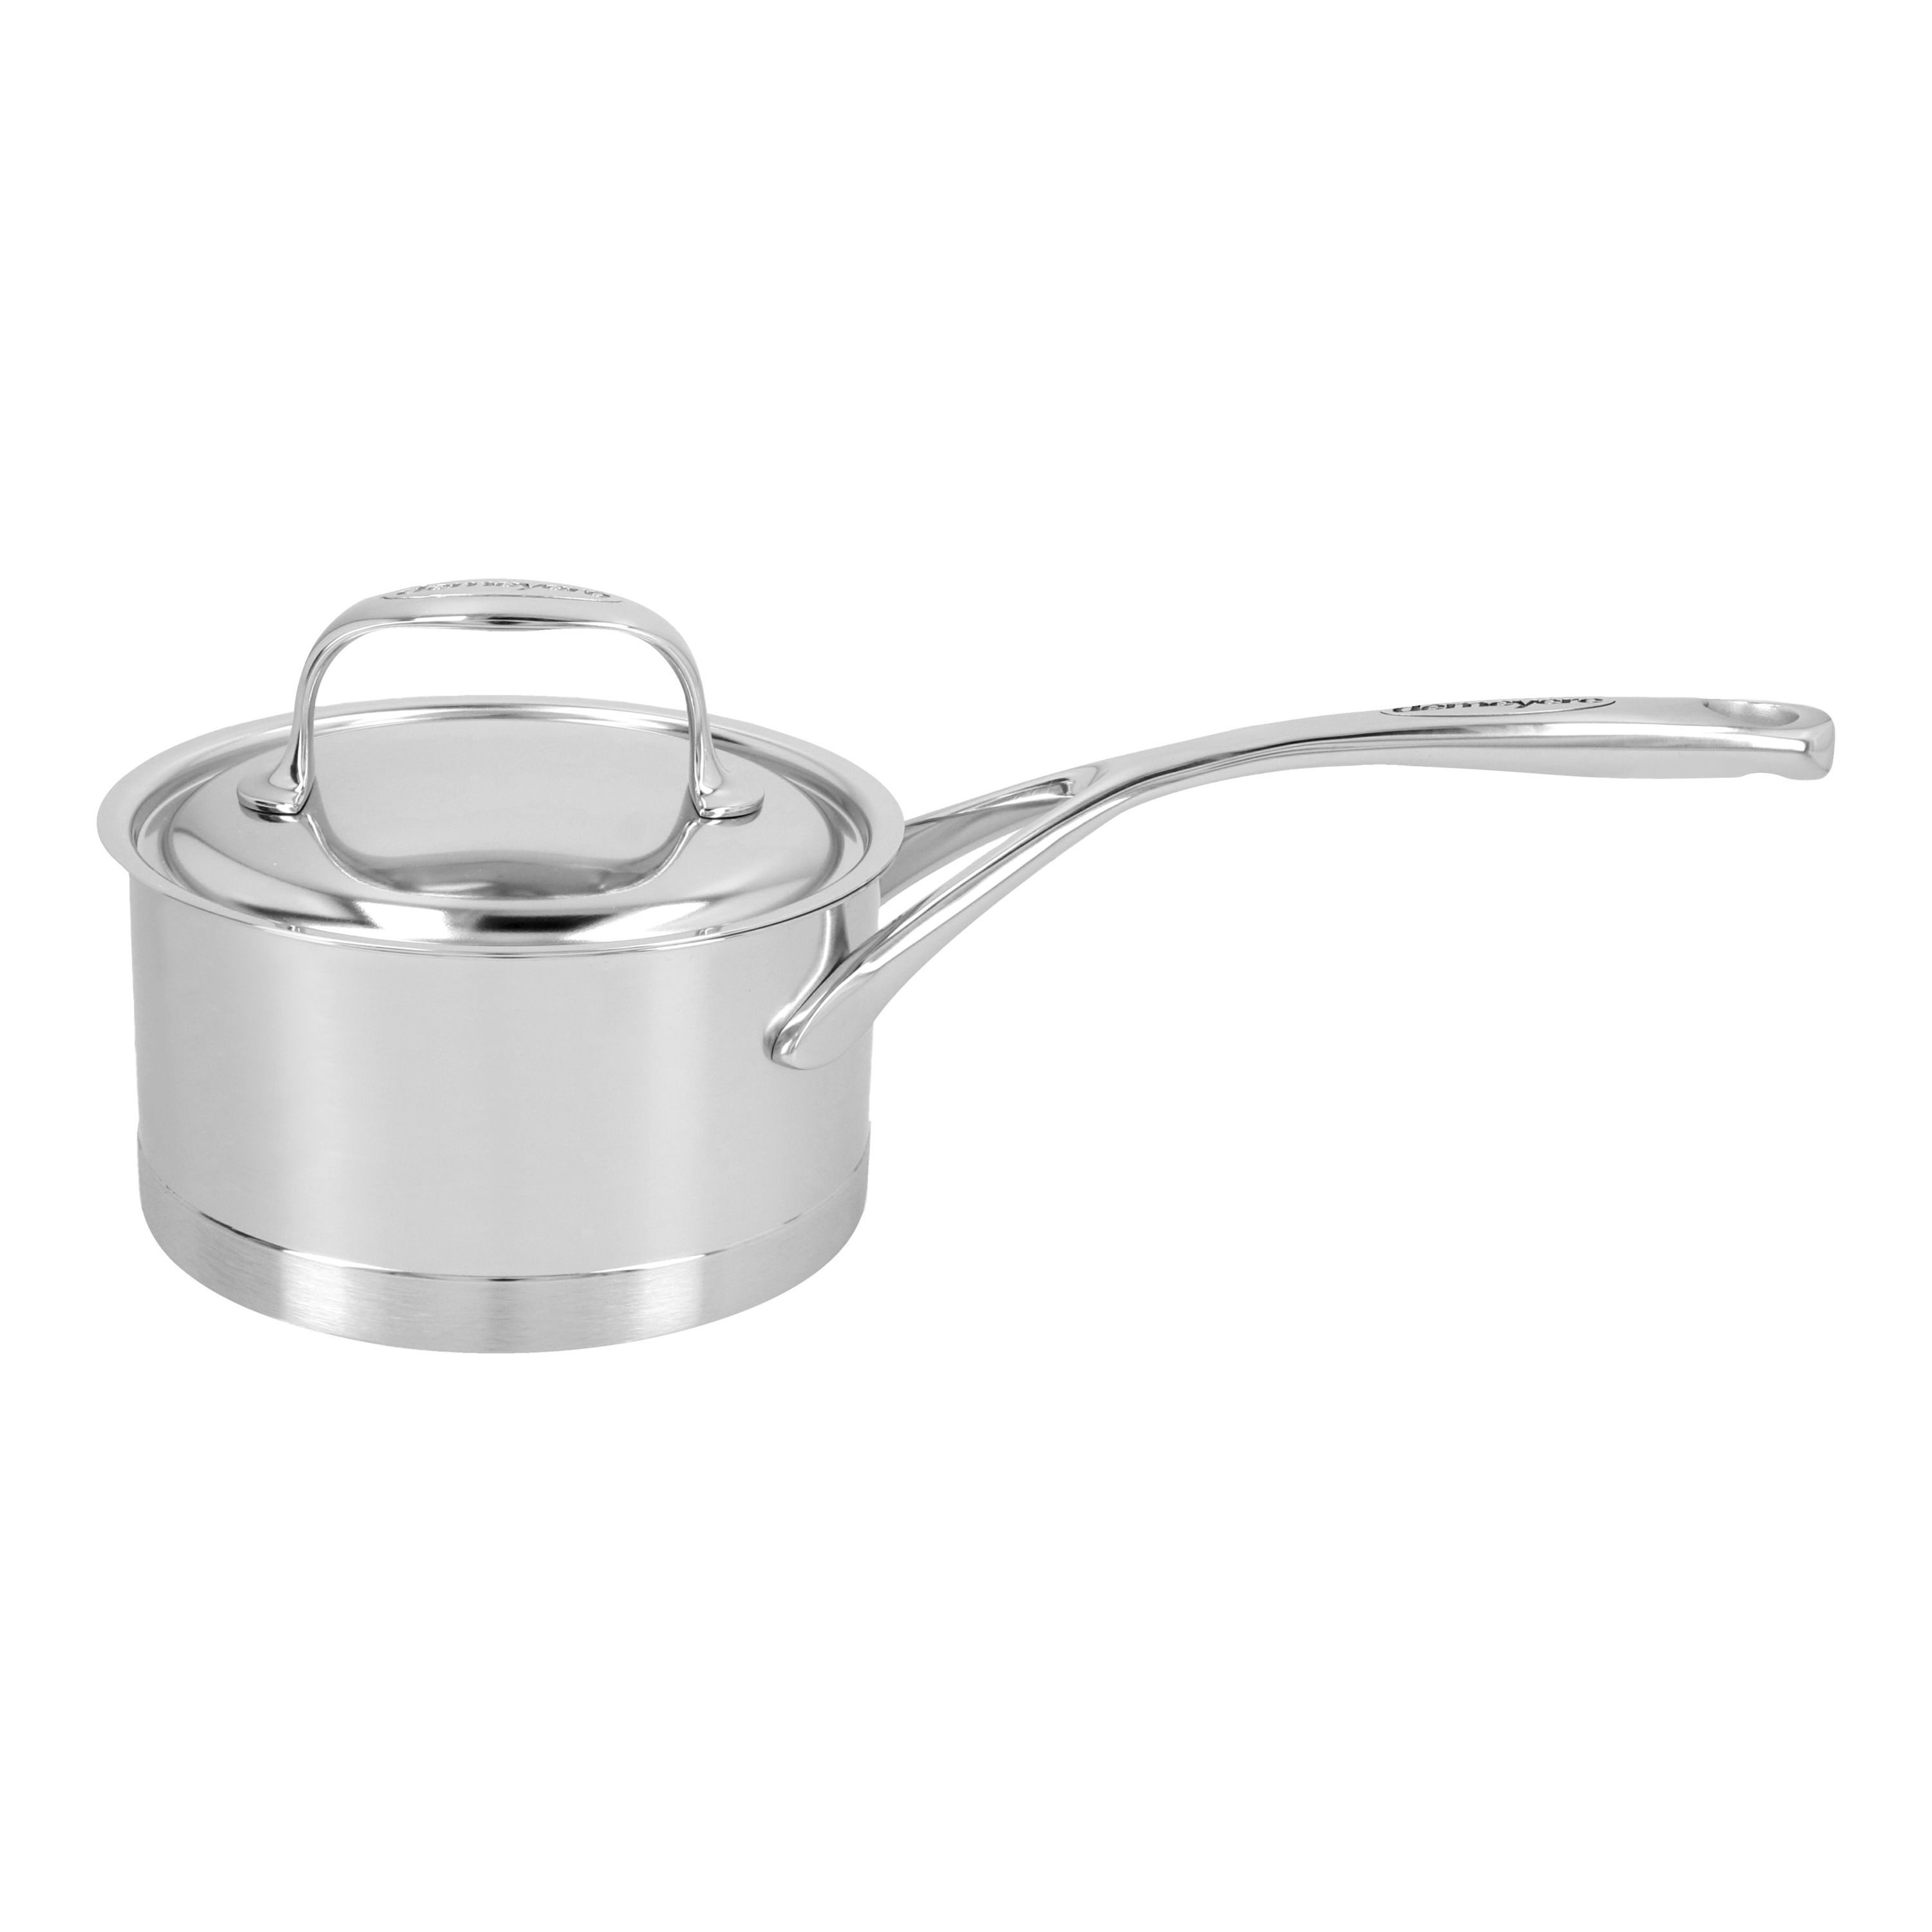 1,1.6,2.3 Quarts Stainless Steel Sauce Pan With Glass Lid 